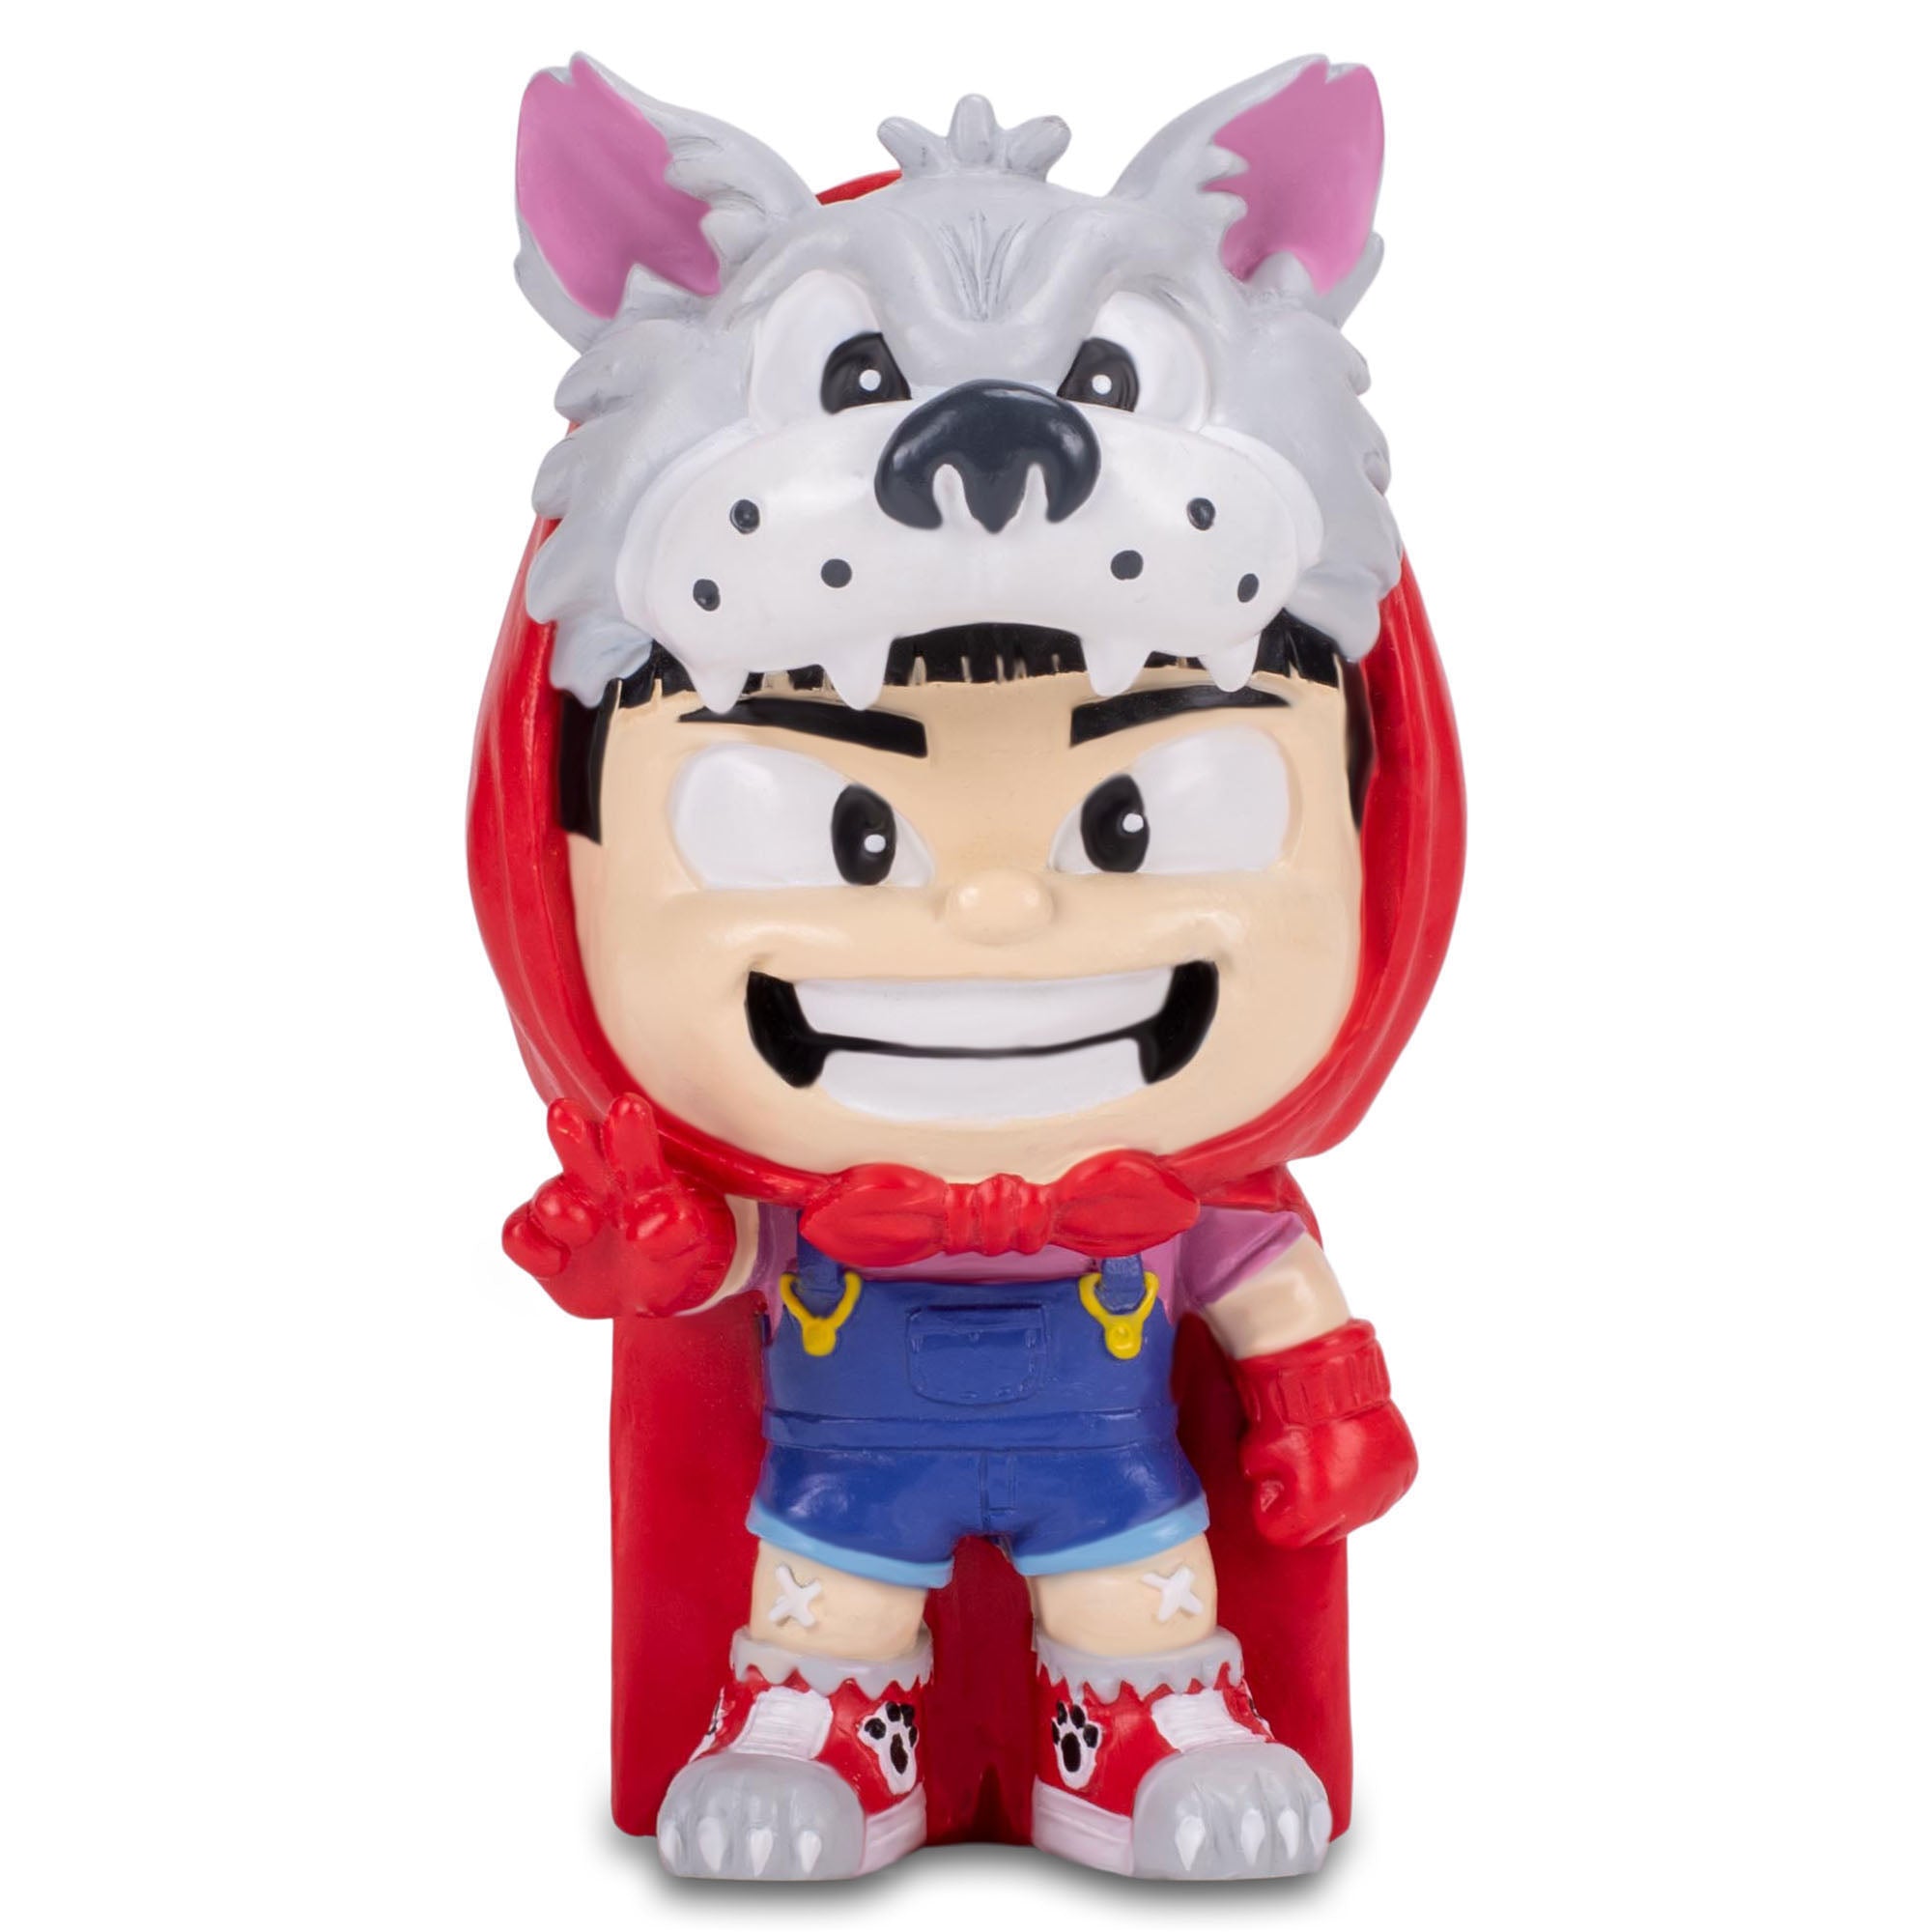 Front angle of folk lore character, Little Red Riding Hood, action figure with wolf hat and candy apple red cape.